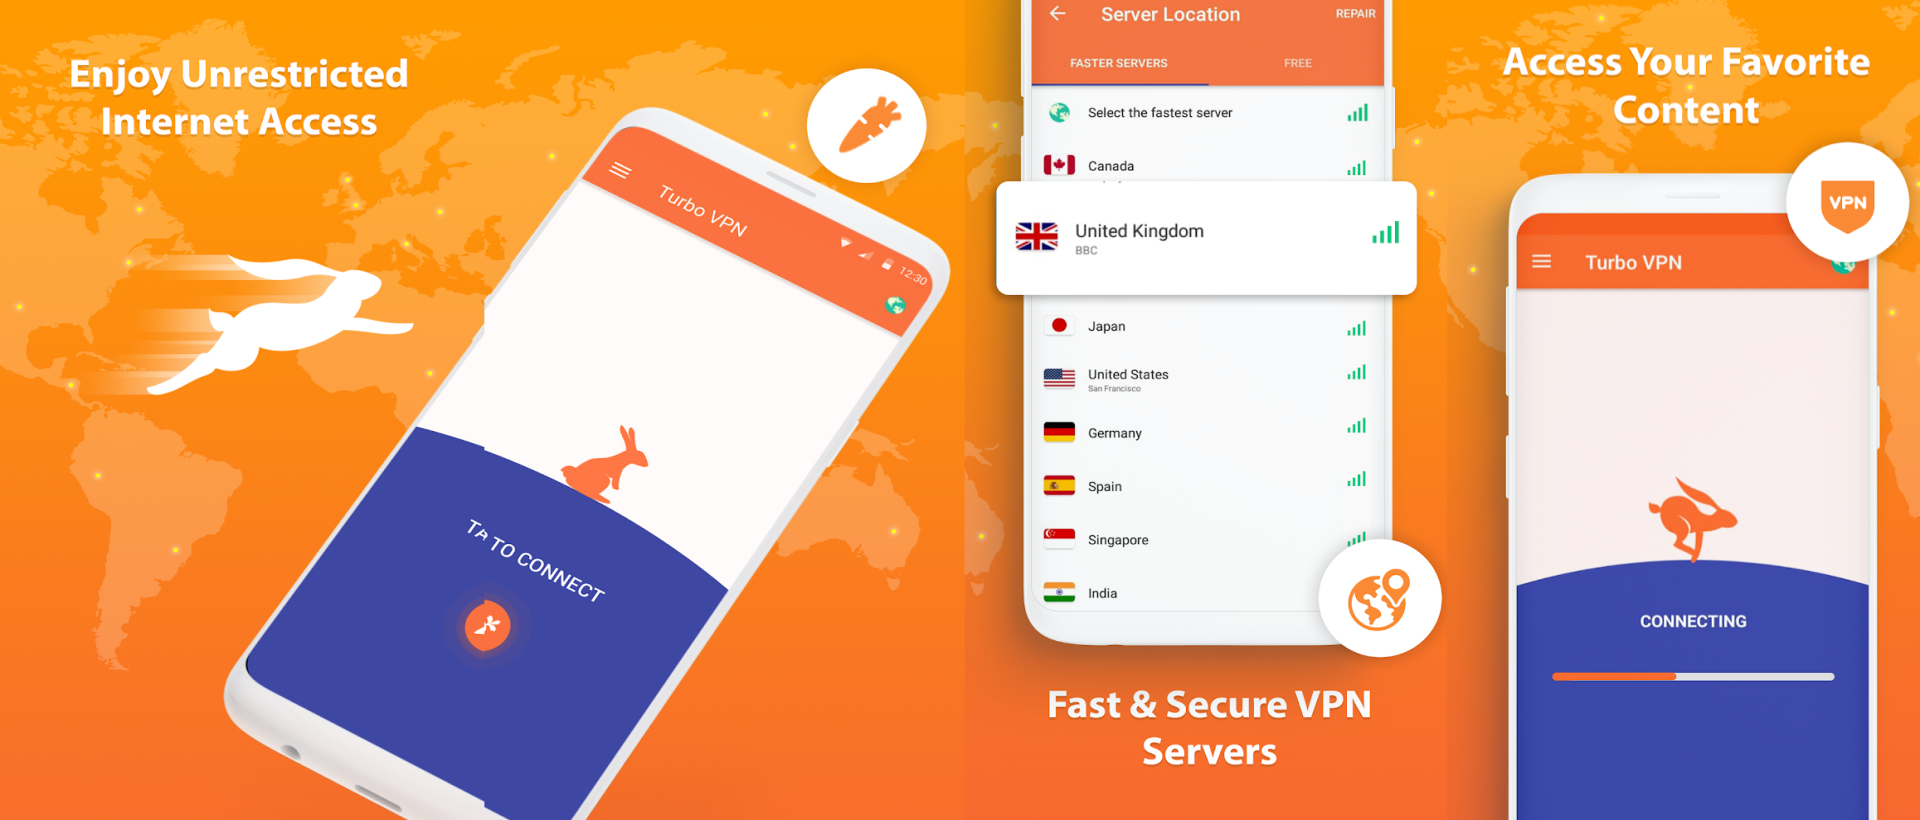 Download & Play Turbo VPN on PC & Mac with NoxPlayer (Emulator)